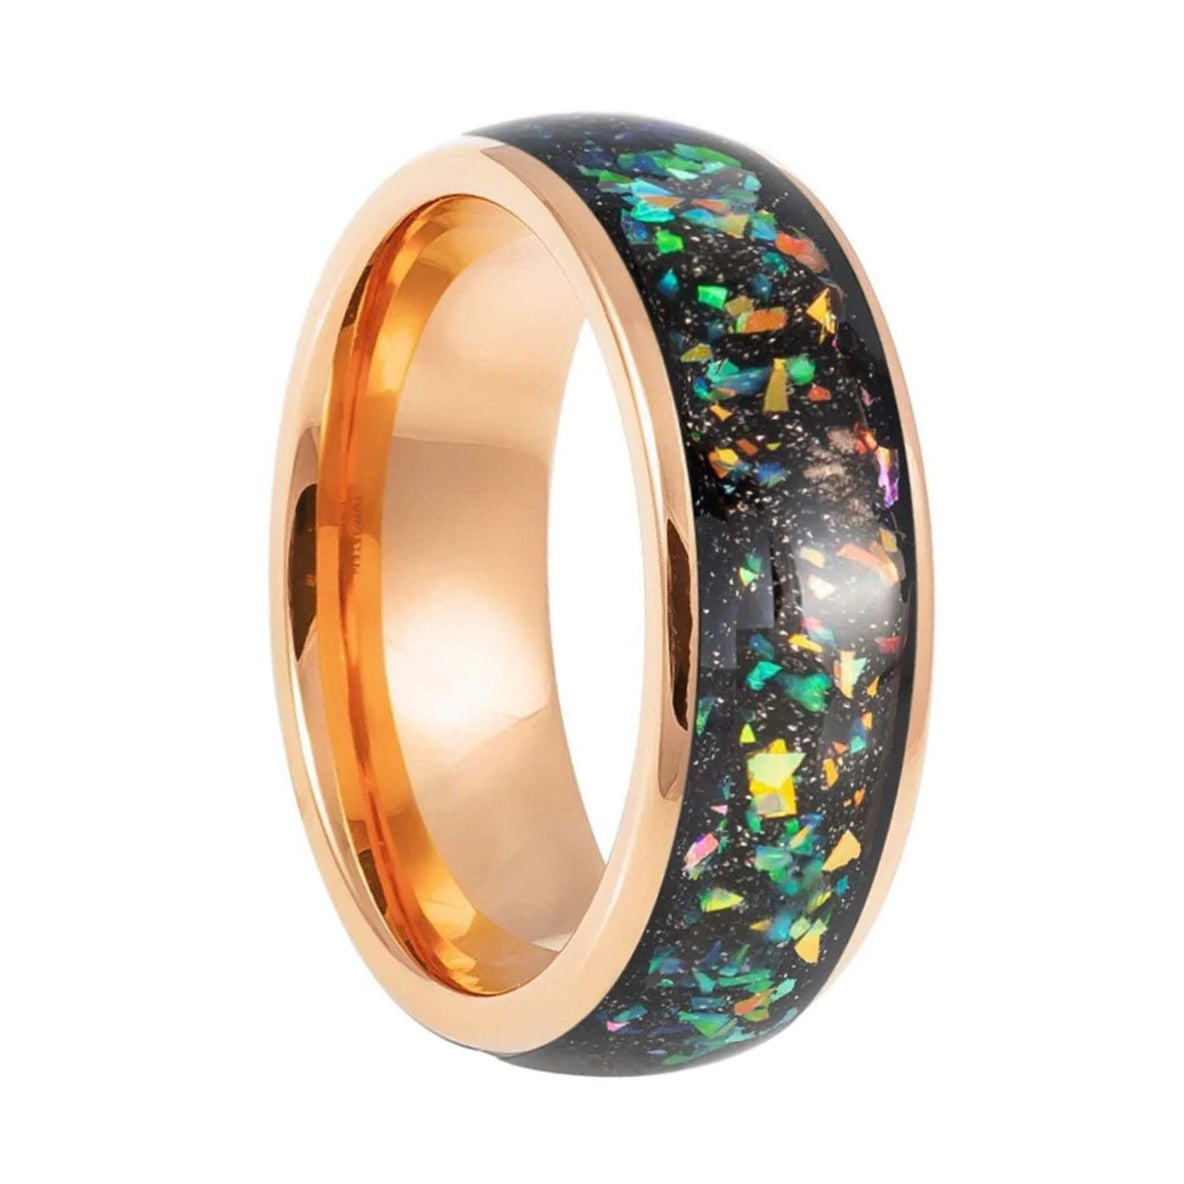 Sparkling Opal & Abalone Black Inlay Rose Gold Tungsten Men's Wedding Band